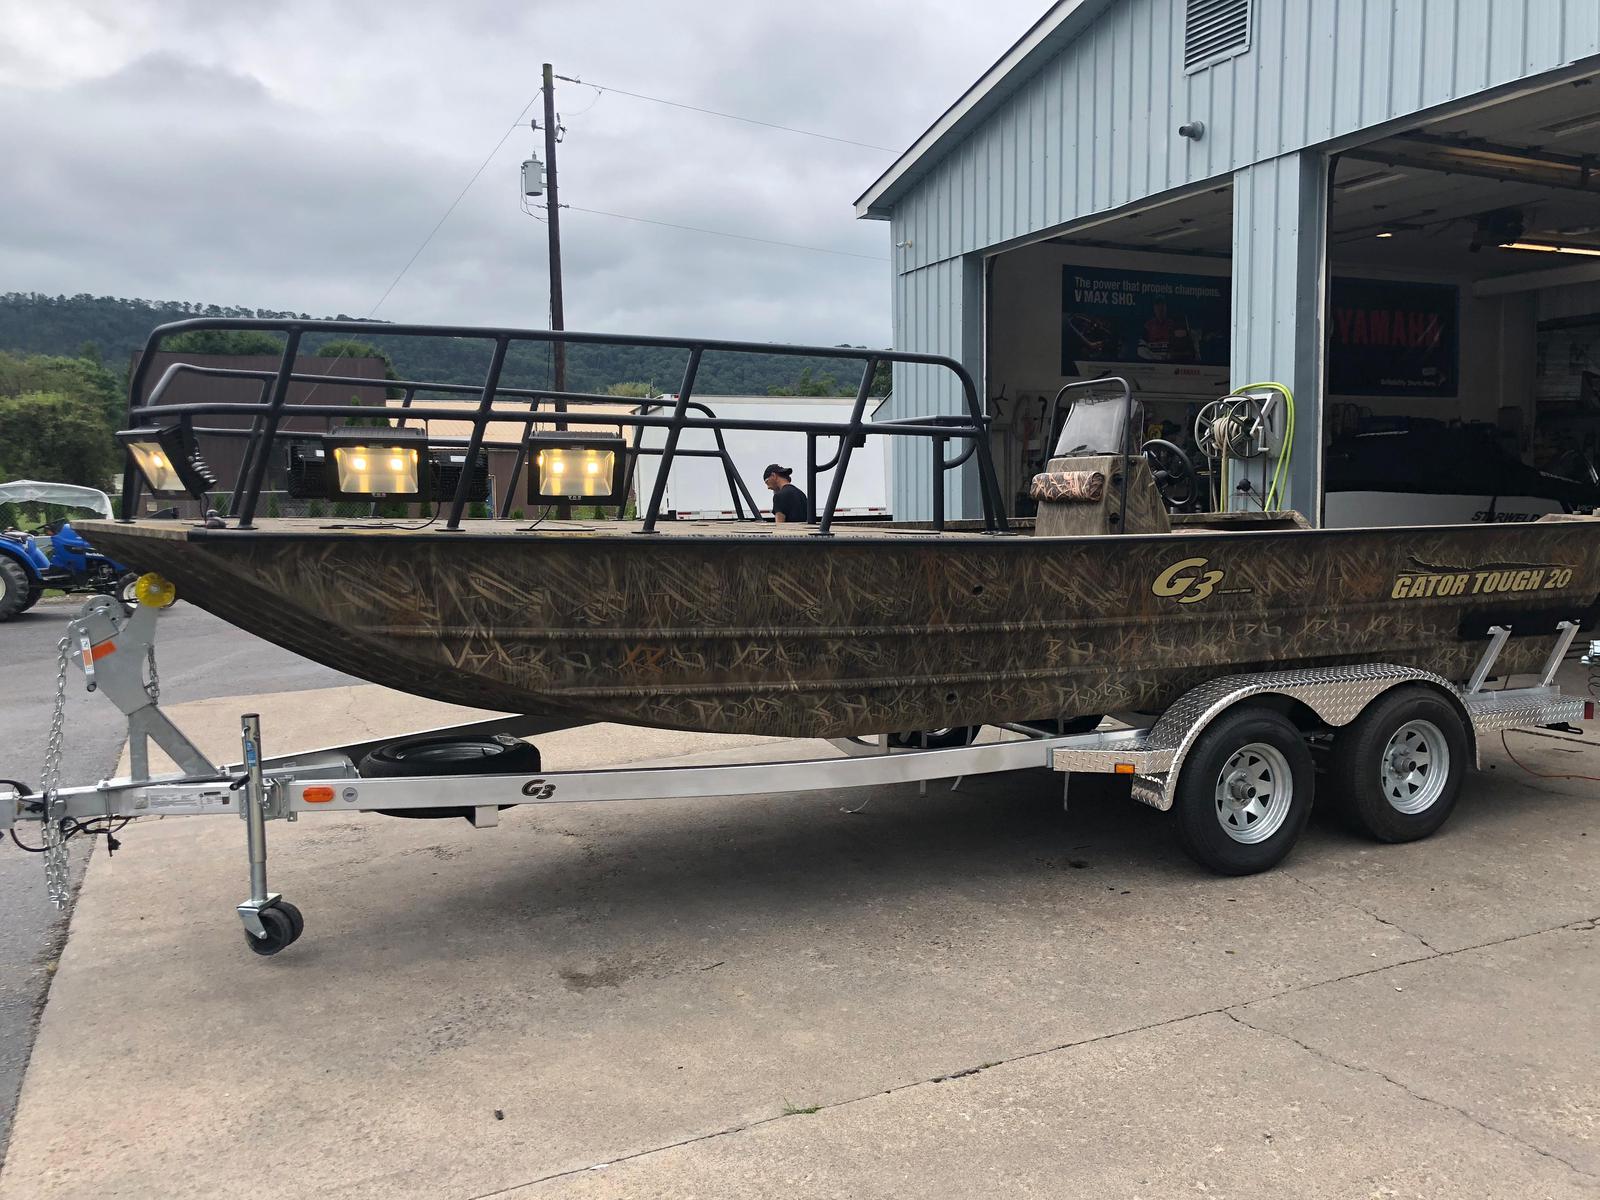 G3 Gator Tough 20 Bow Fish boats for sale in United States